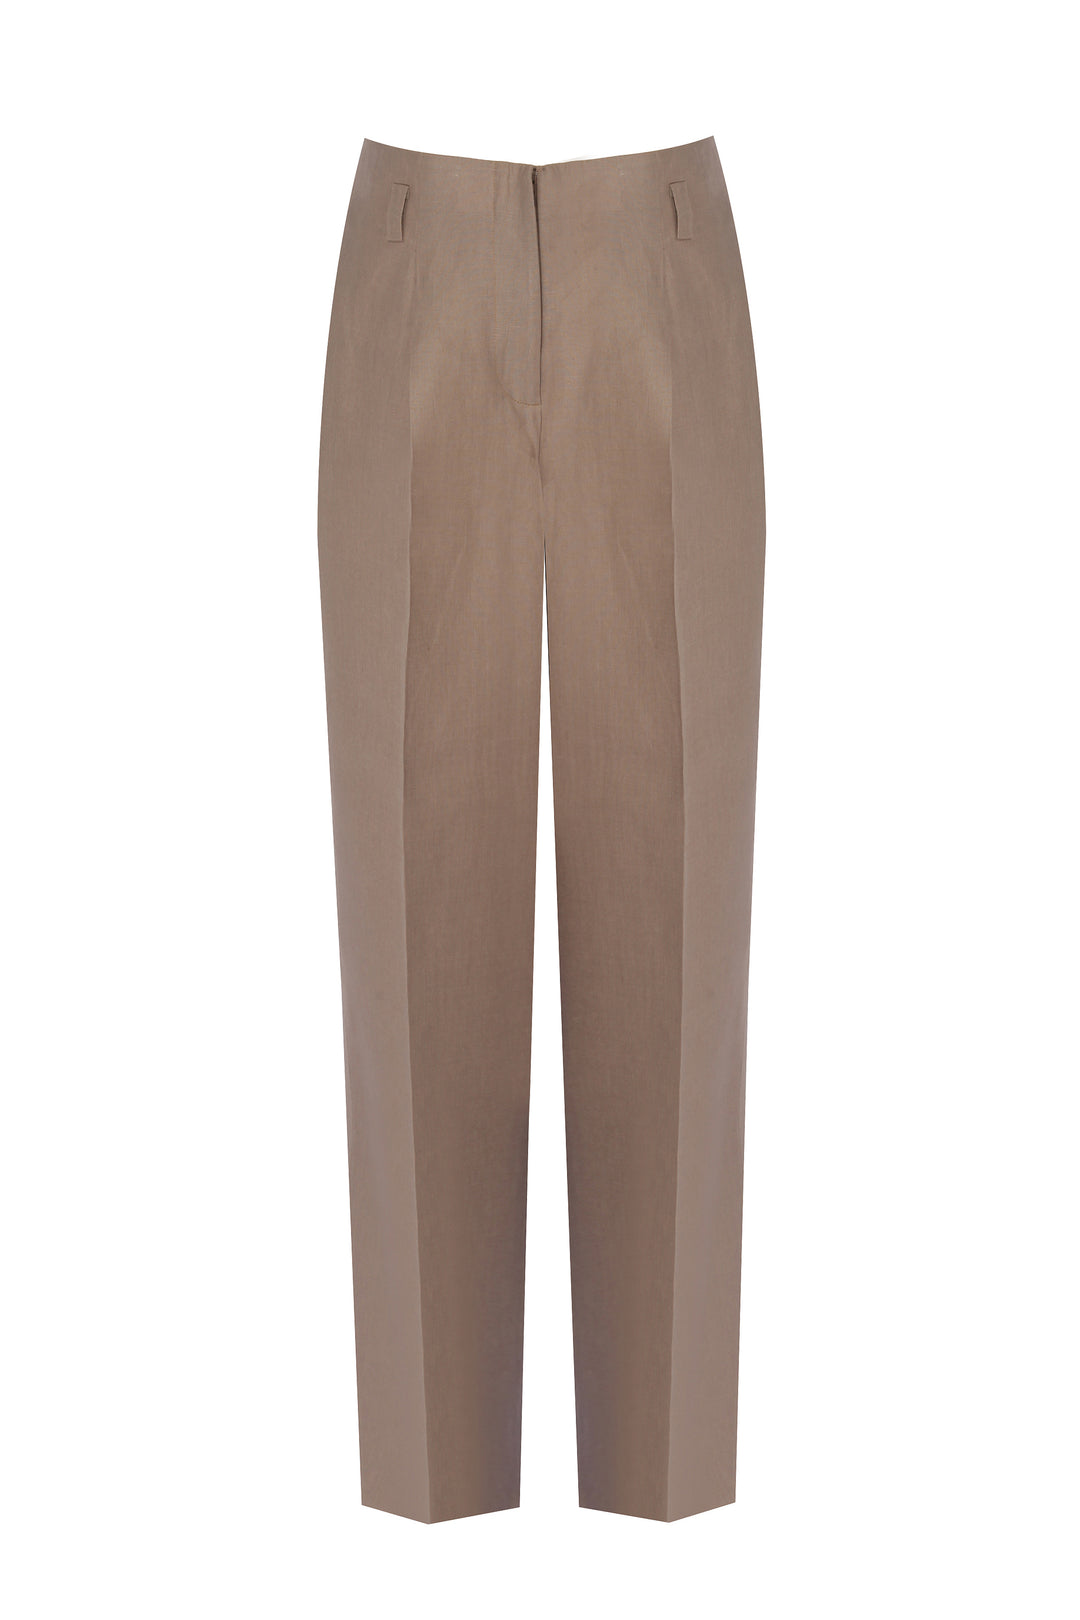 OVERSIZE LINEN PANTS / TAUPE